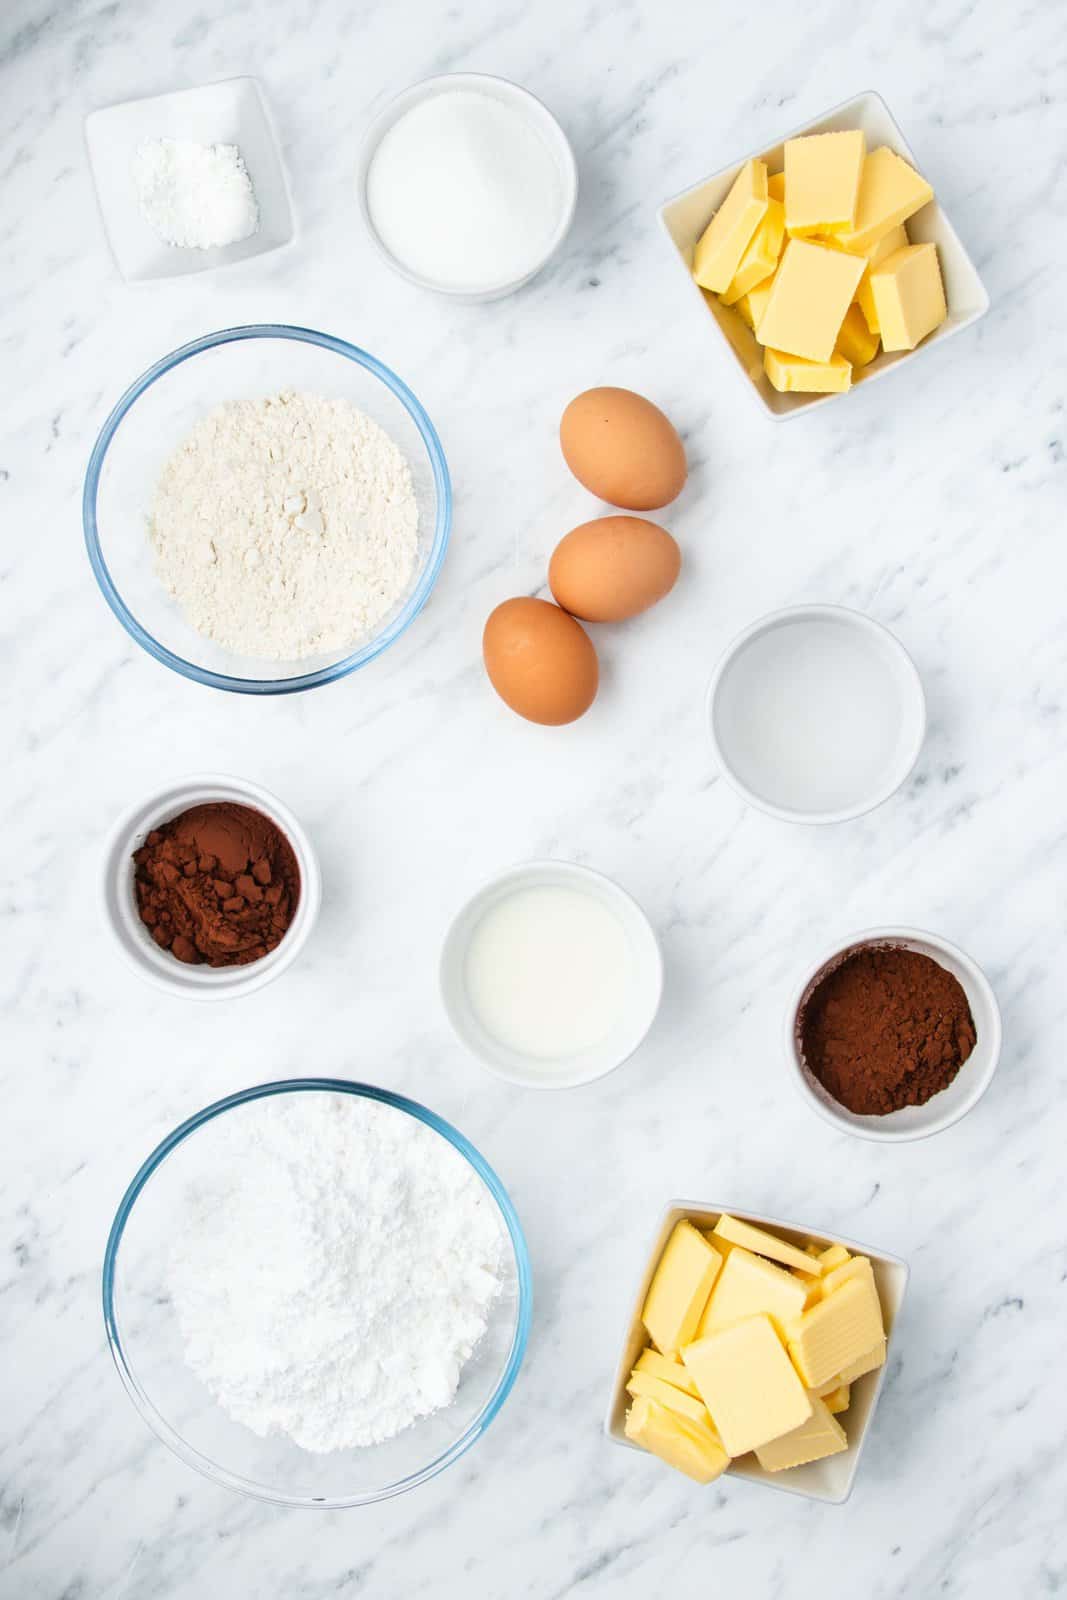 Ingredients needed: cocoa powder, boiling water, eggs, unsalted butter, granulated sugar, all-purpose flour, baking powder, powdered sugar, milk and chocolate sprinkles.